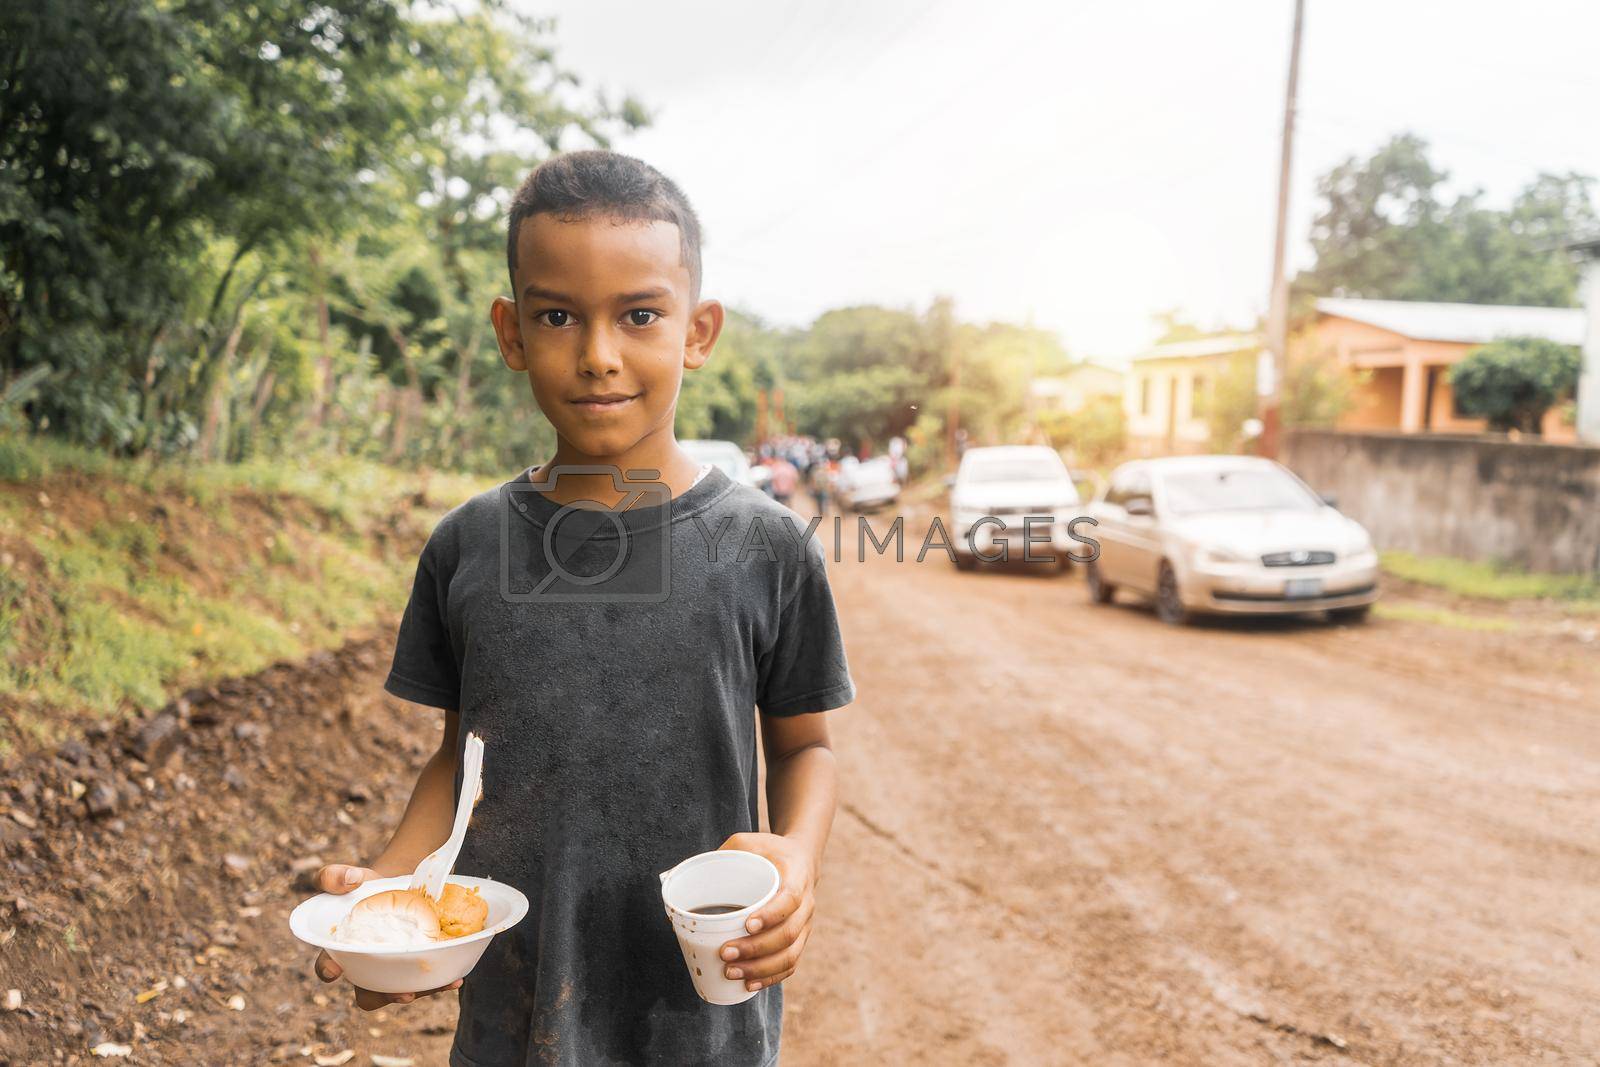 Royalty free image of Nicaraguan boy holding a plate with nacatamal and a glass with coffee during a local celebration by cfalvarez